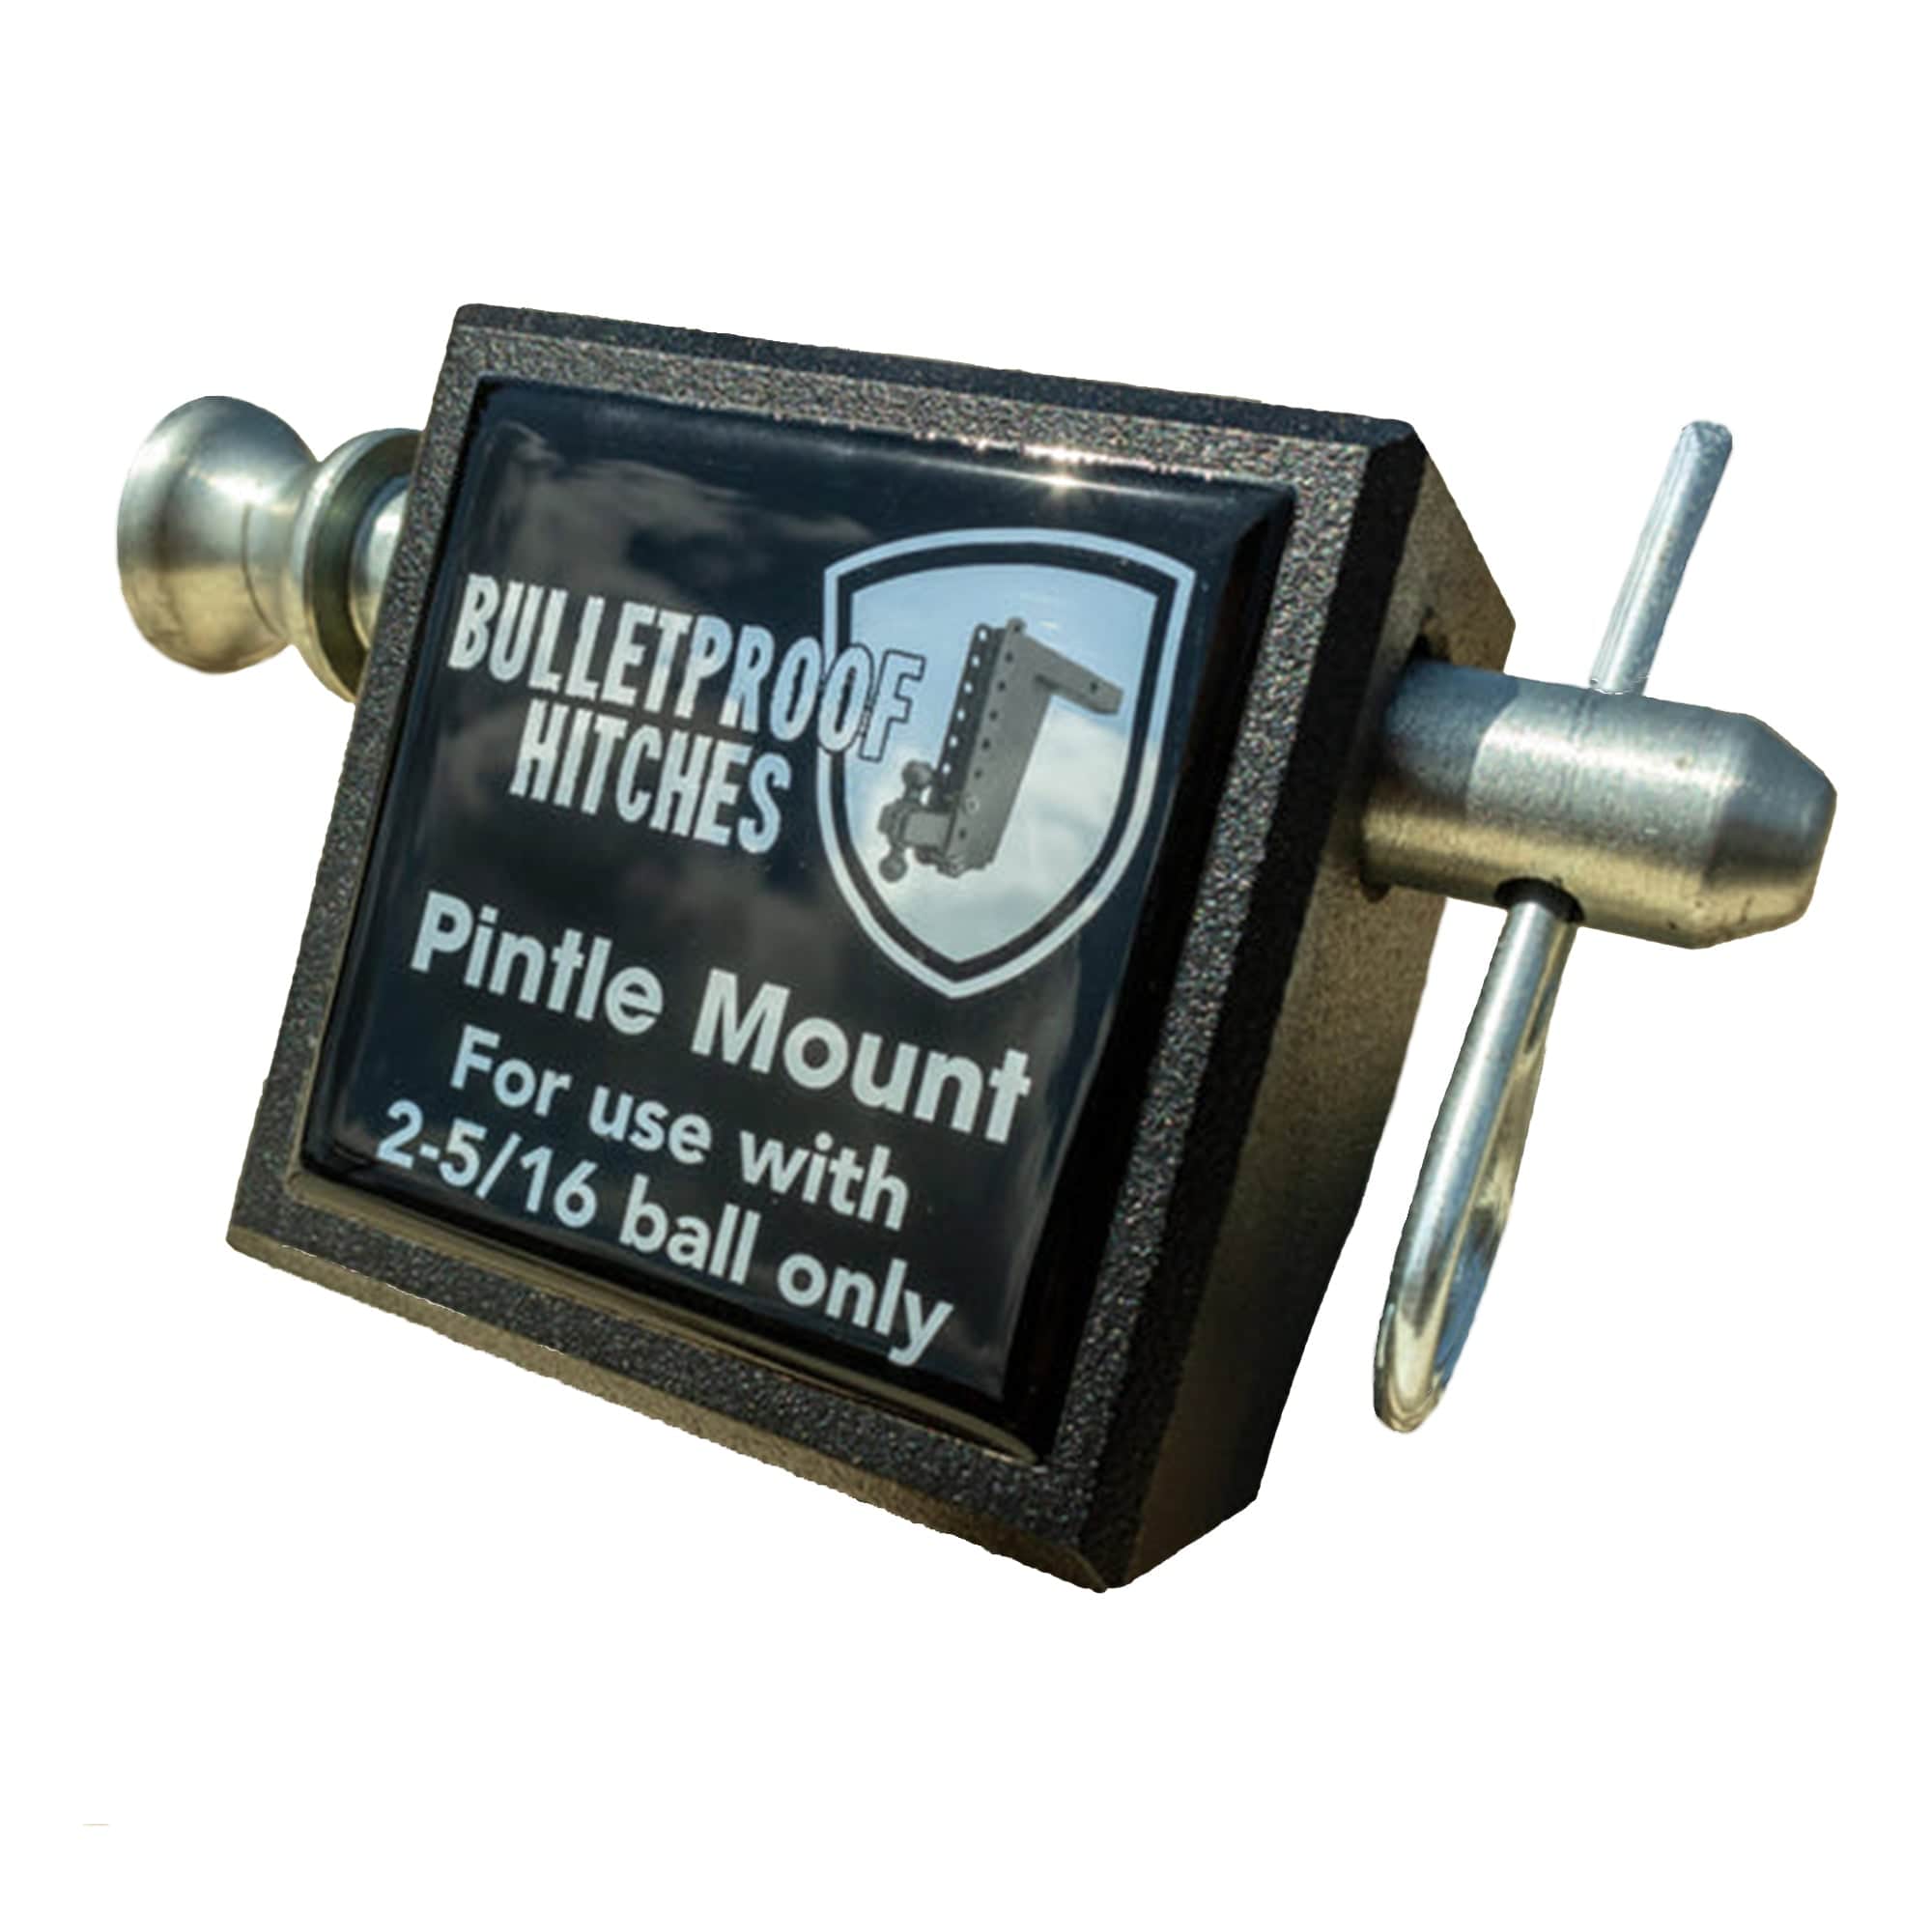 Bulletproof Hitches PINTLEATTACHMENT Pintle Mount Attachment for 2-5/16" Ball Only